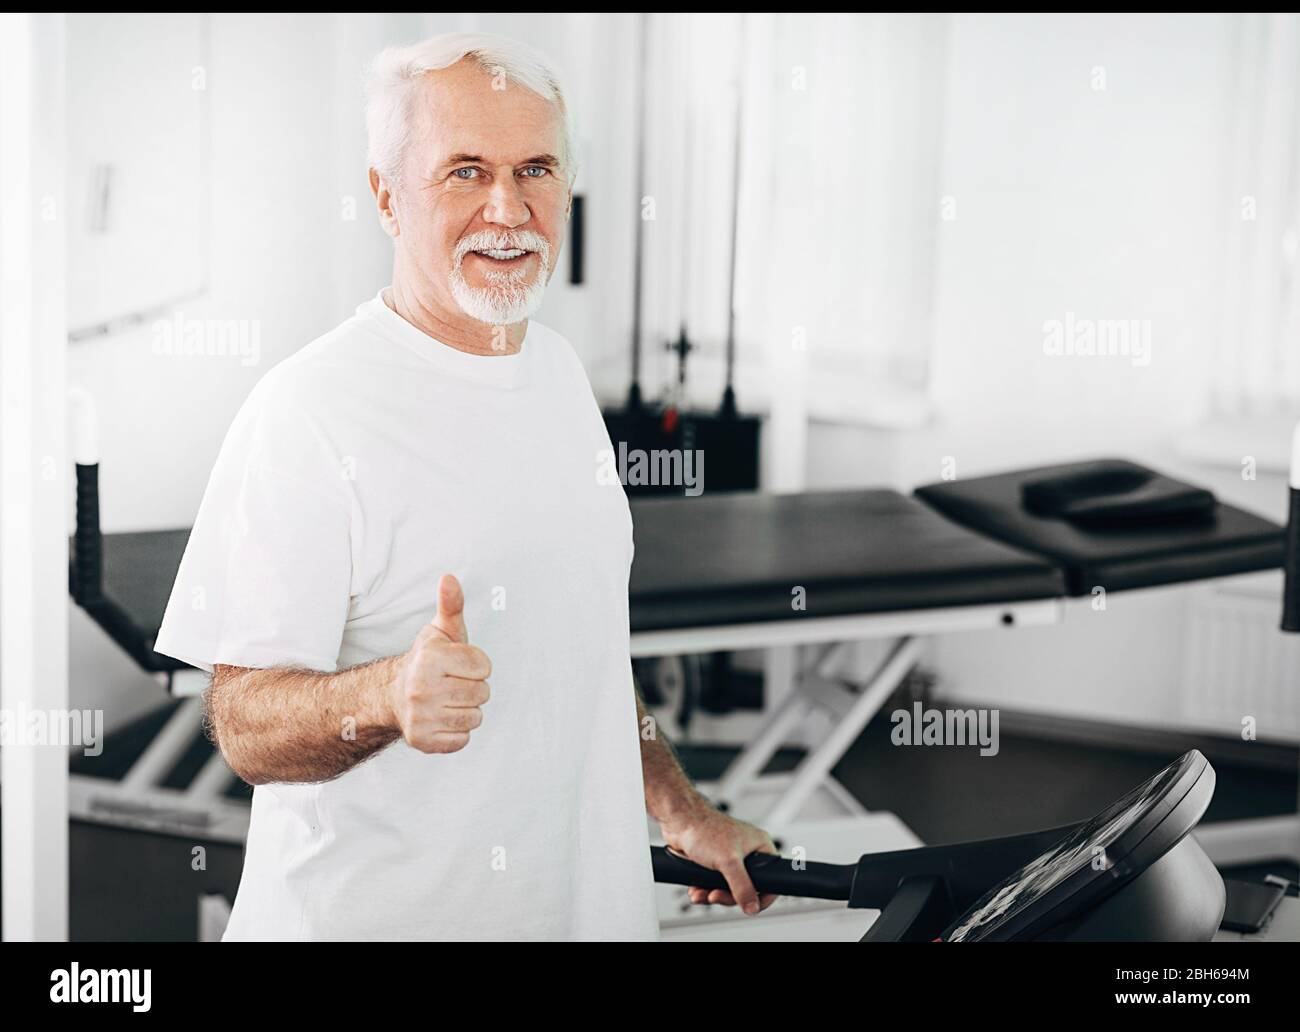 Senior man showing thumbs up while training at wellness center Stock Photo